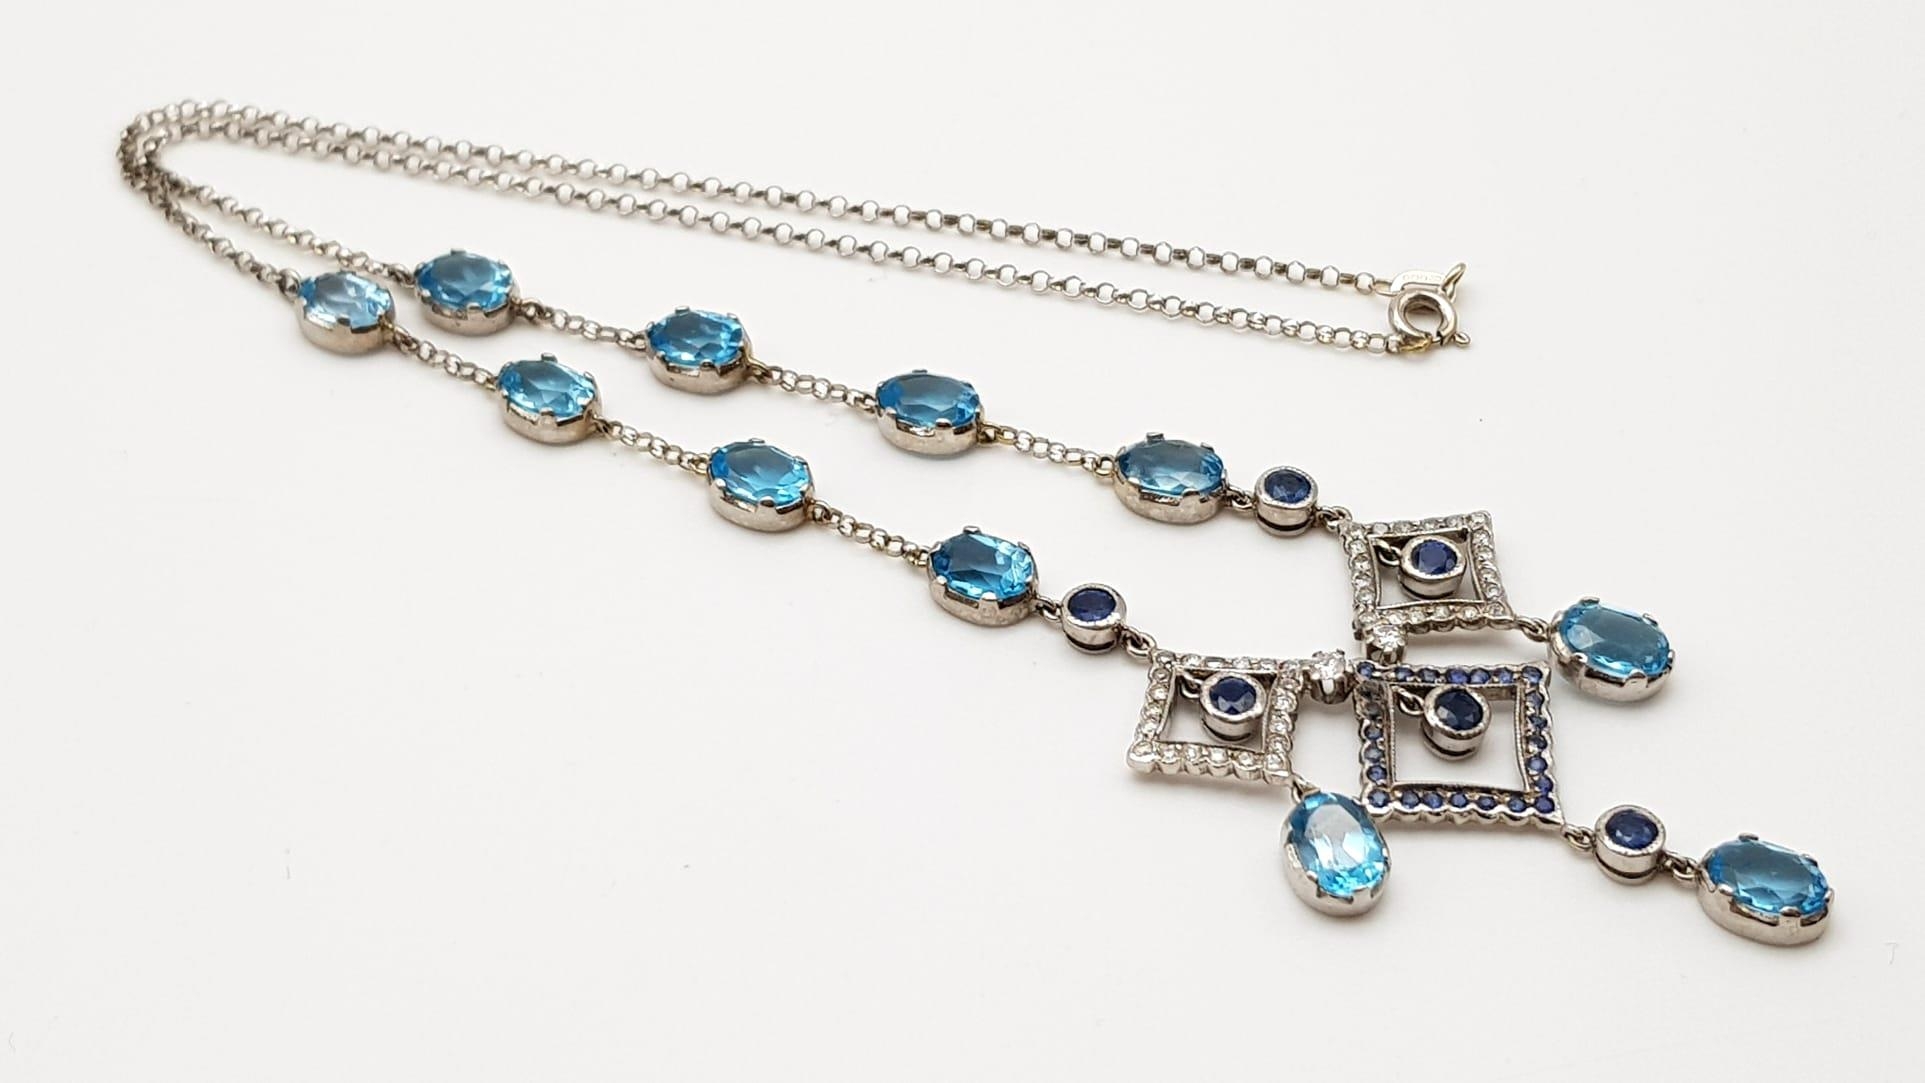 An Elegant 18K White Gold Necklace - interspersed with clean aquamarine stones and climaxing in a - Image 4 of 5